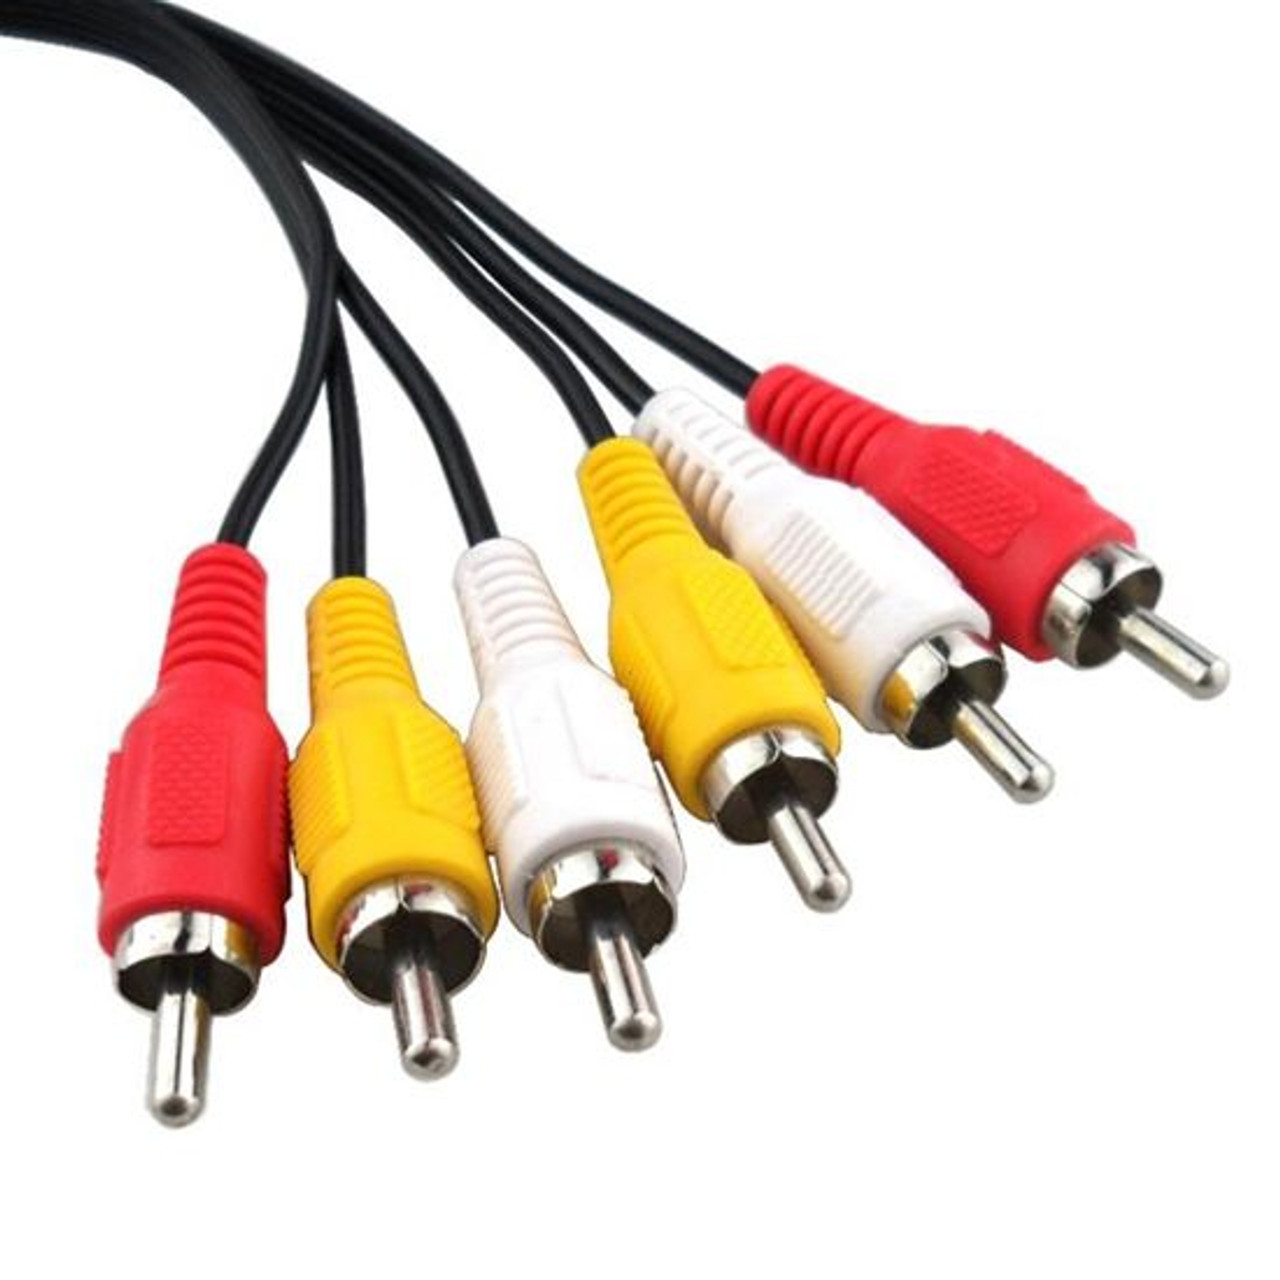 Summit 6' FT RCA Cable Audio Video 3-RCA Male to 3-RCA Male Each End High Resolution Composite A/V Cable RED YELLOW WHITE Stereo Jumper with Plug Connectors Dubbing Line